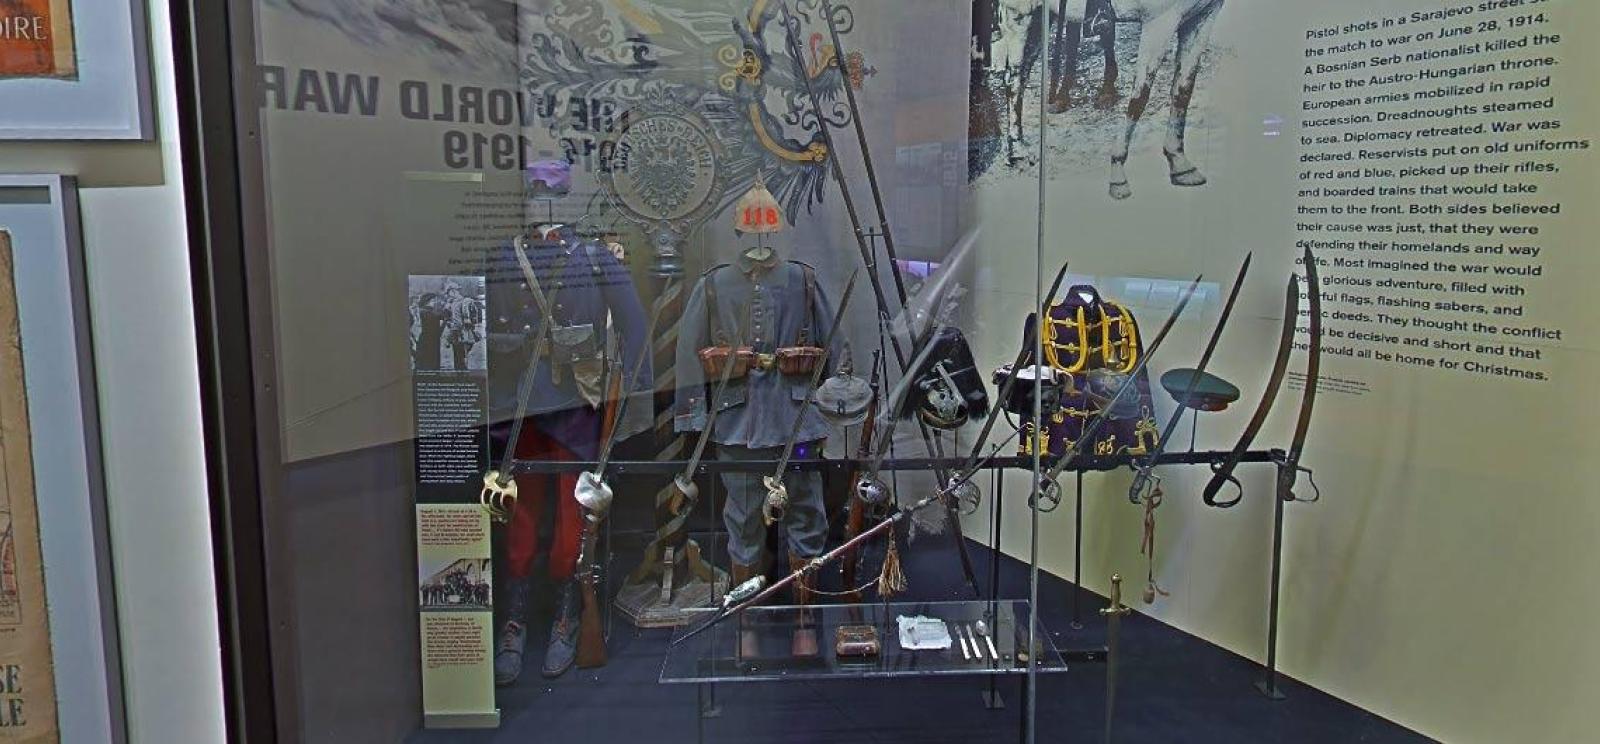 Modern photograph of a museum display of WWI-era military uniforms, hats and swords.